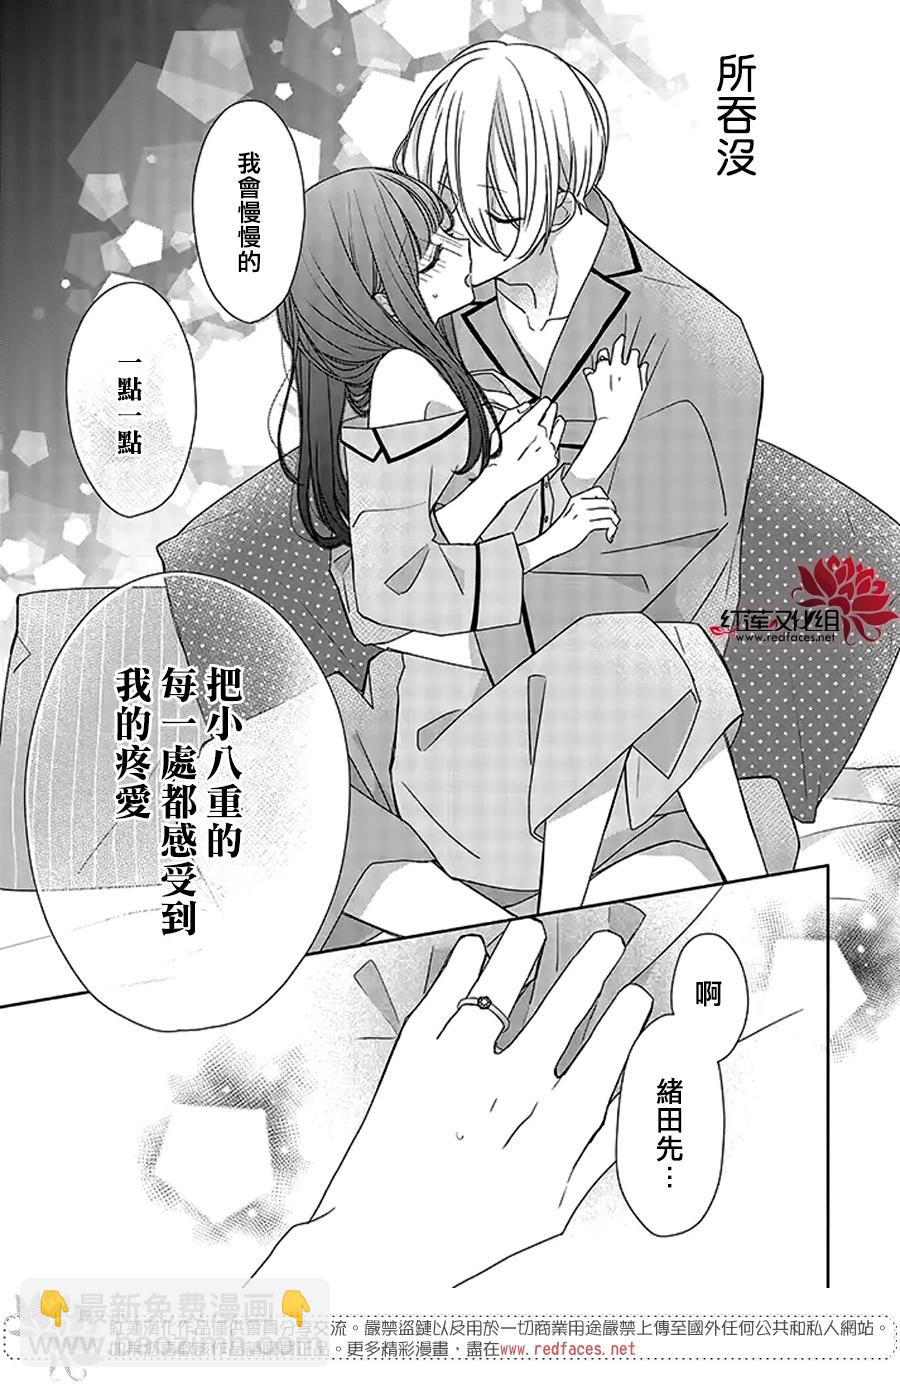 If given a second chance - 第37話 - 3